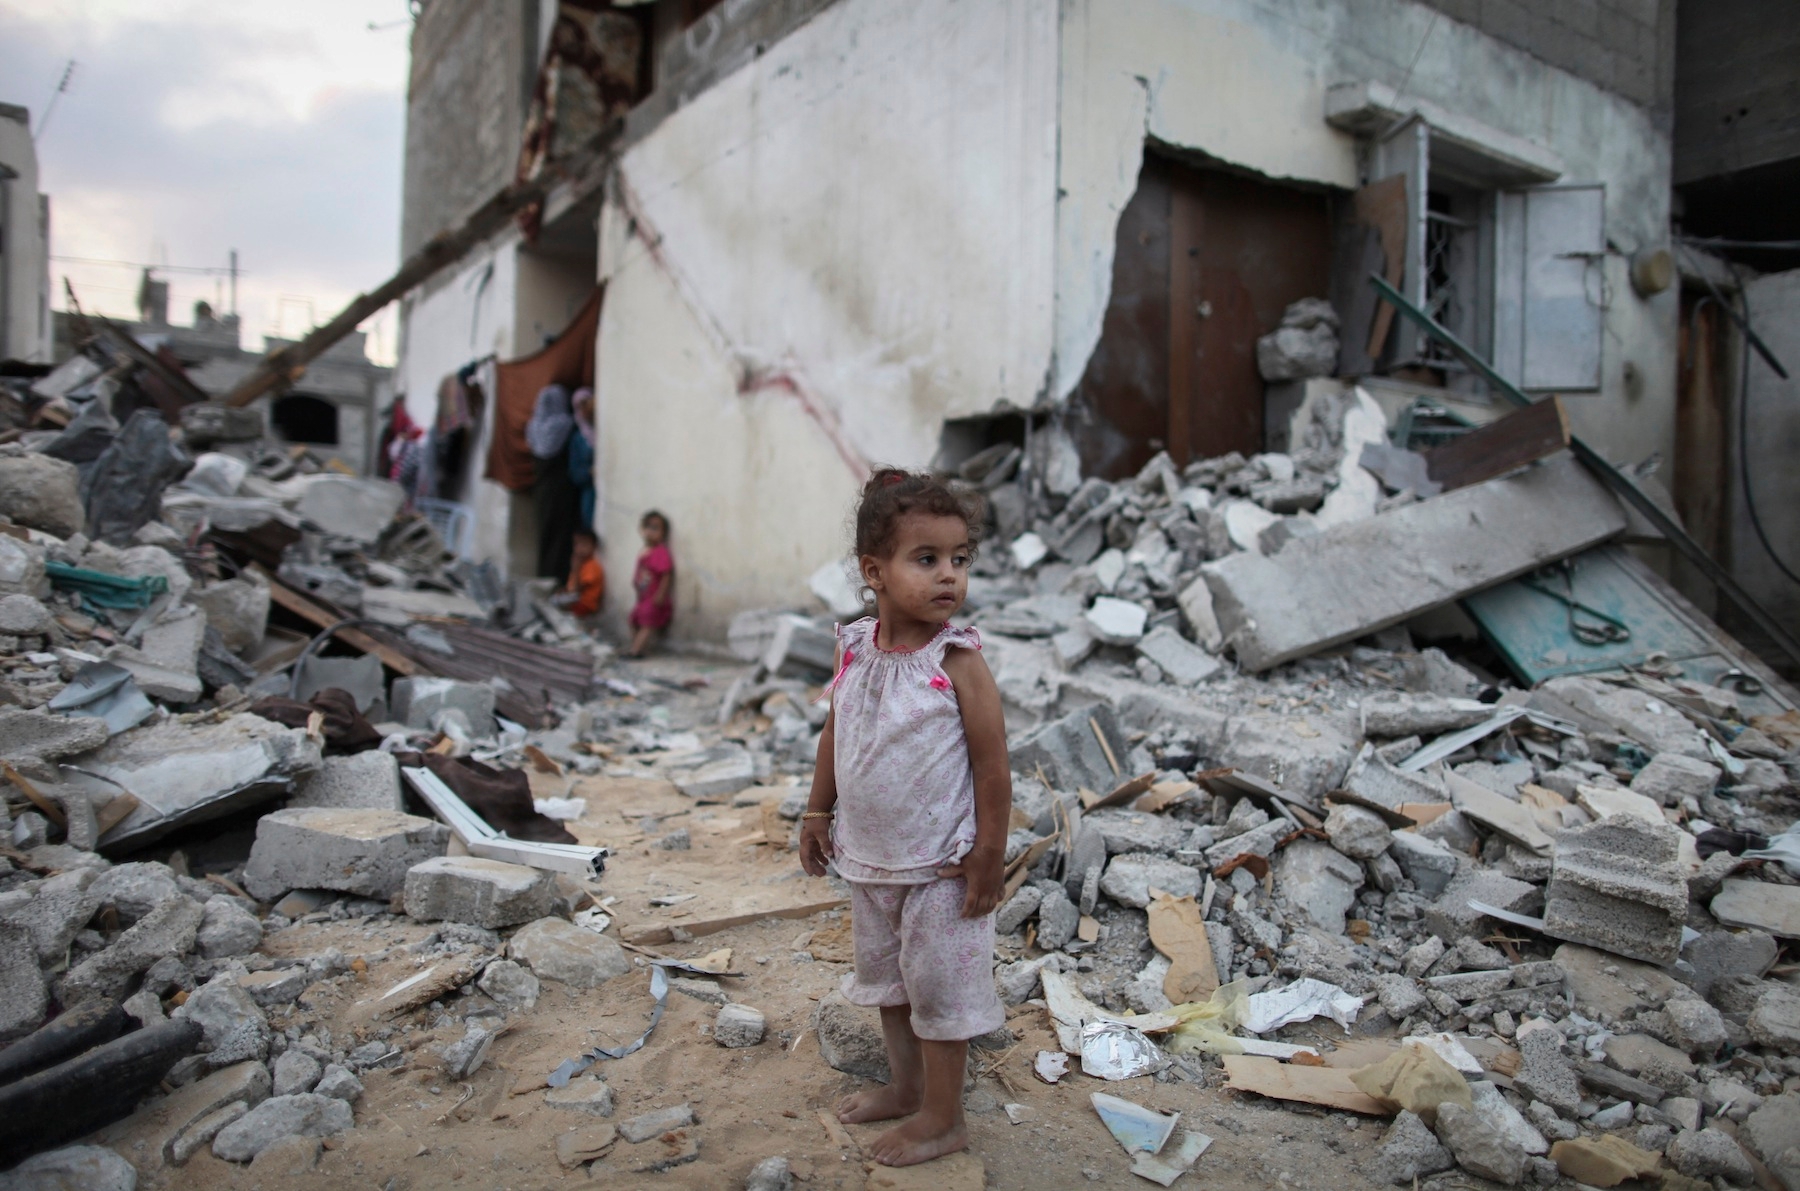 A Palestinian child amid the rubble of homes destroyed by Israeli airstrikes in the northern Gaza Strip, Aug. 18, 2014. (Emad Nasser/Flash90) 